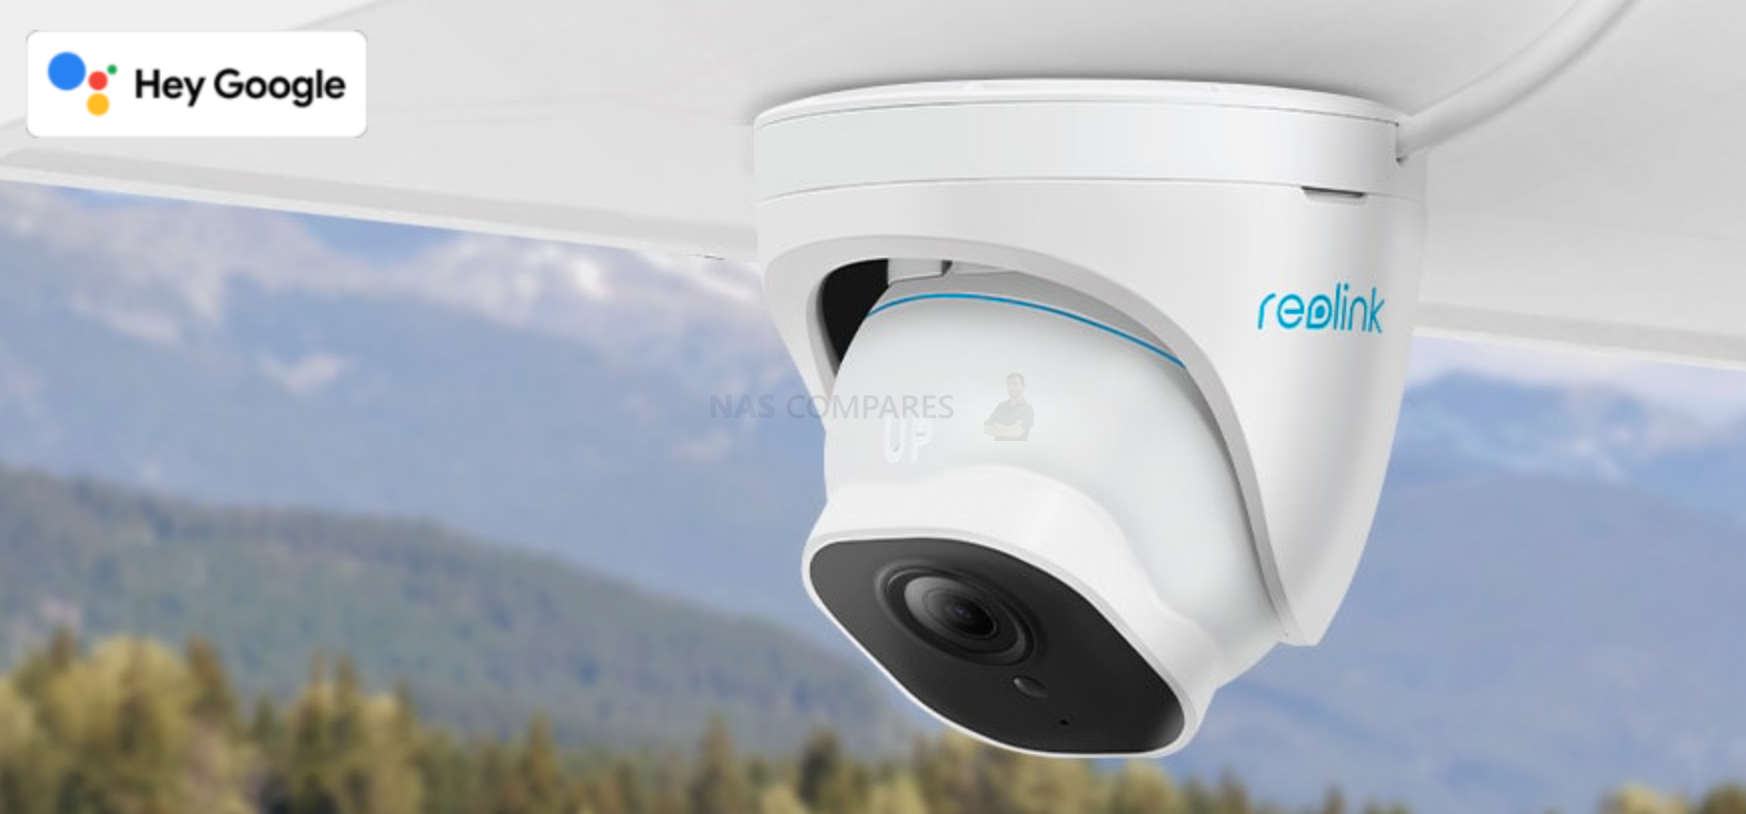 Synology IP Camera TC500 (Dome IP Camera 2880 x 1620/ PoE/ IP67  Compatible/Night Vision Performance: 30 m/SynologyNAS Only)